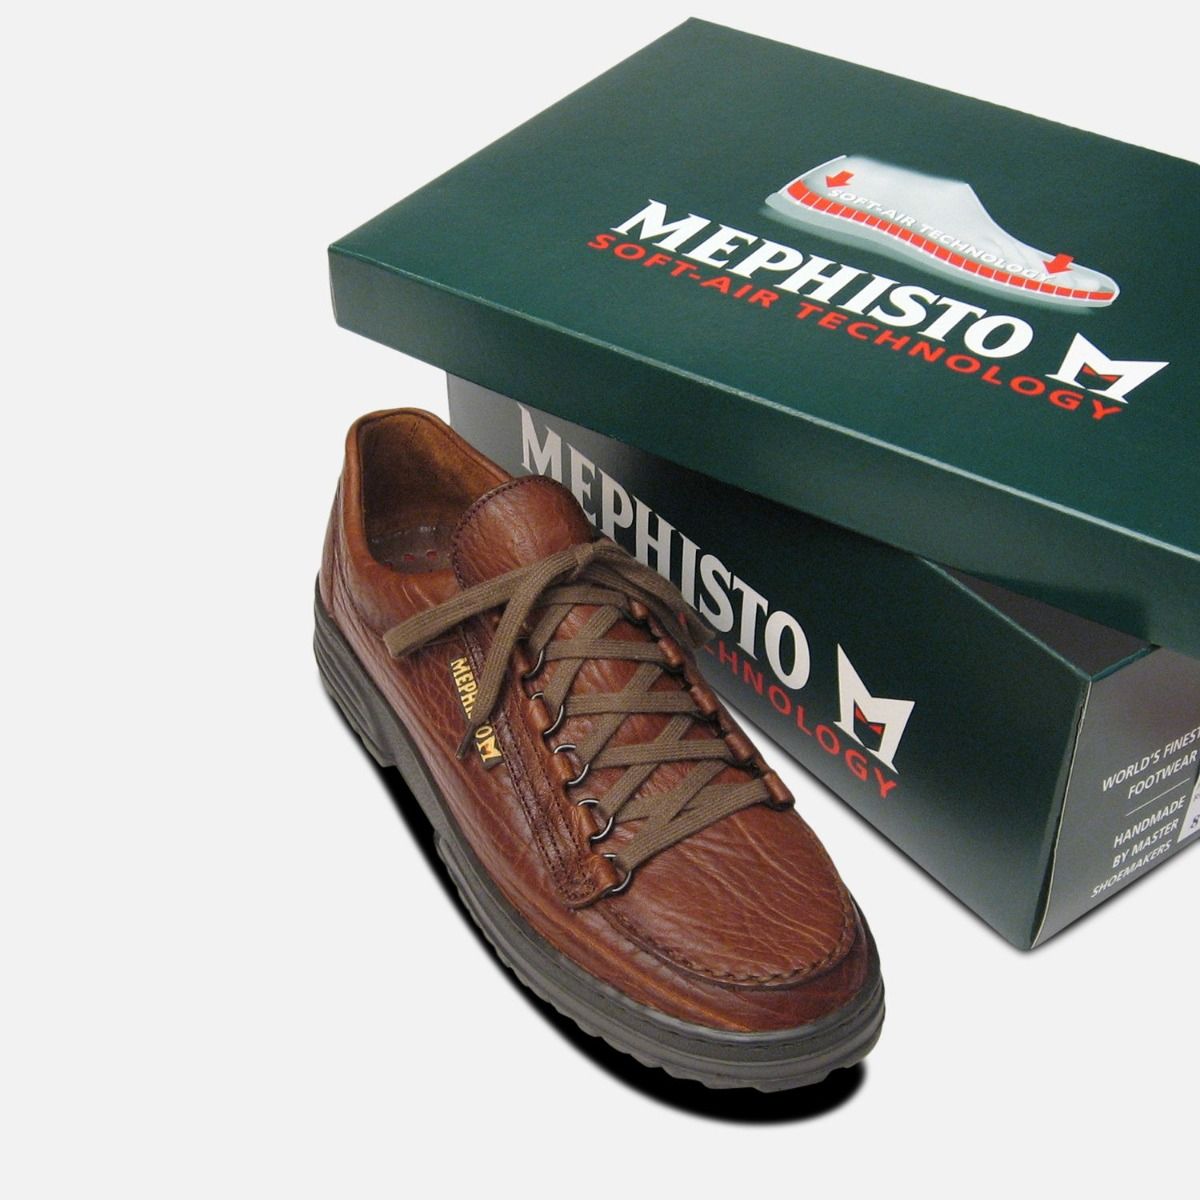 mephisto shoes